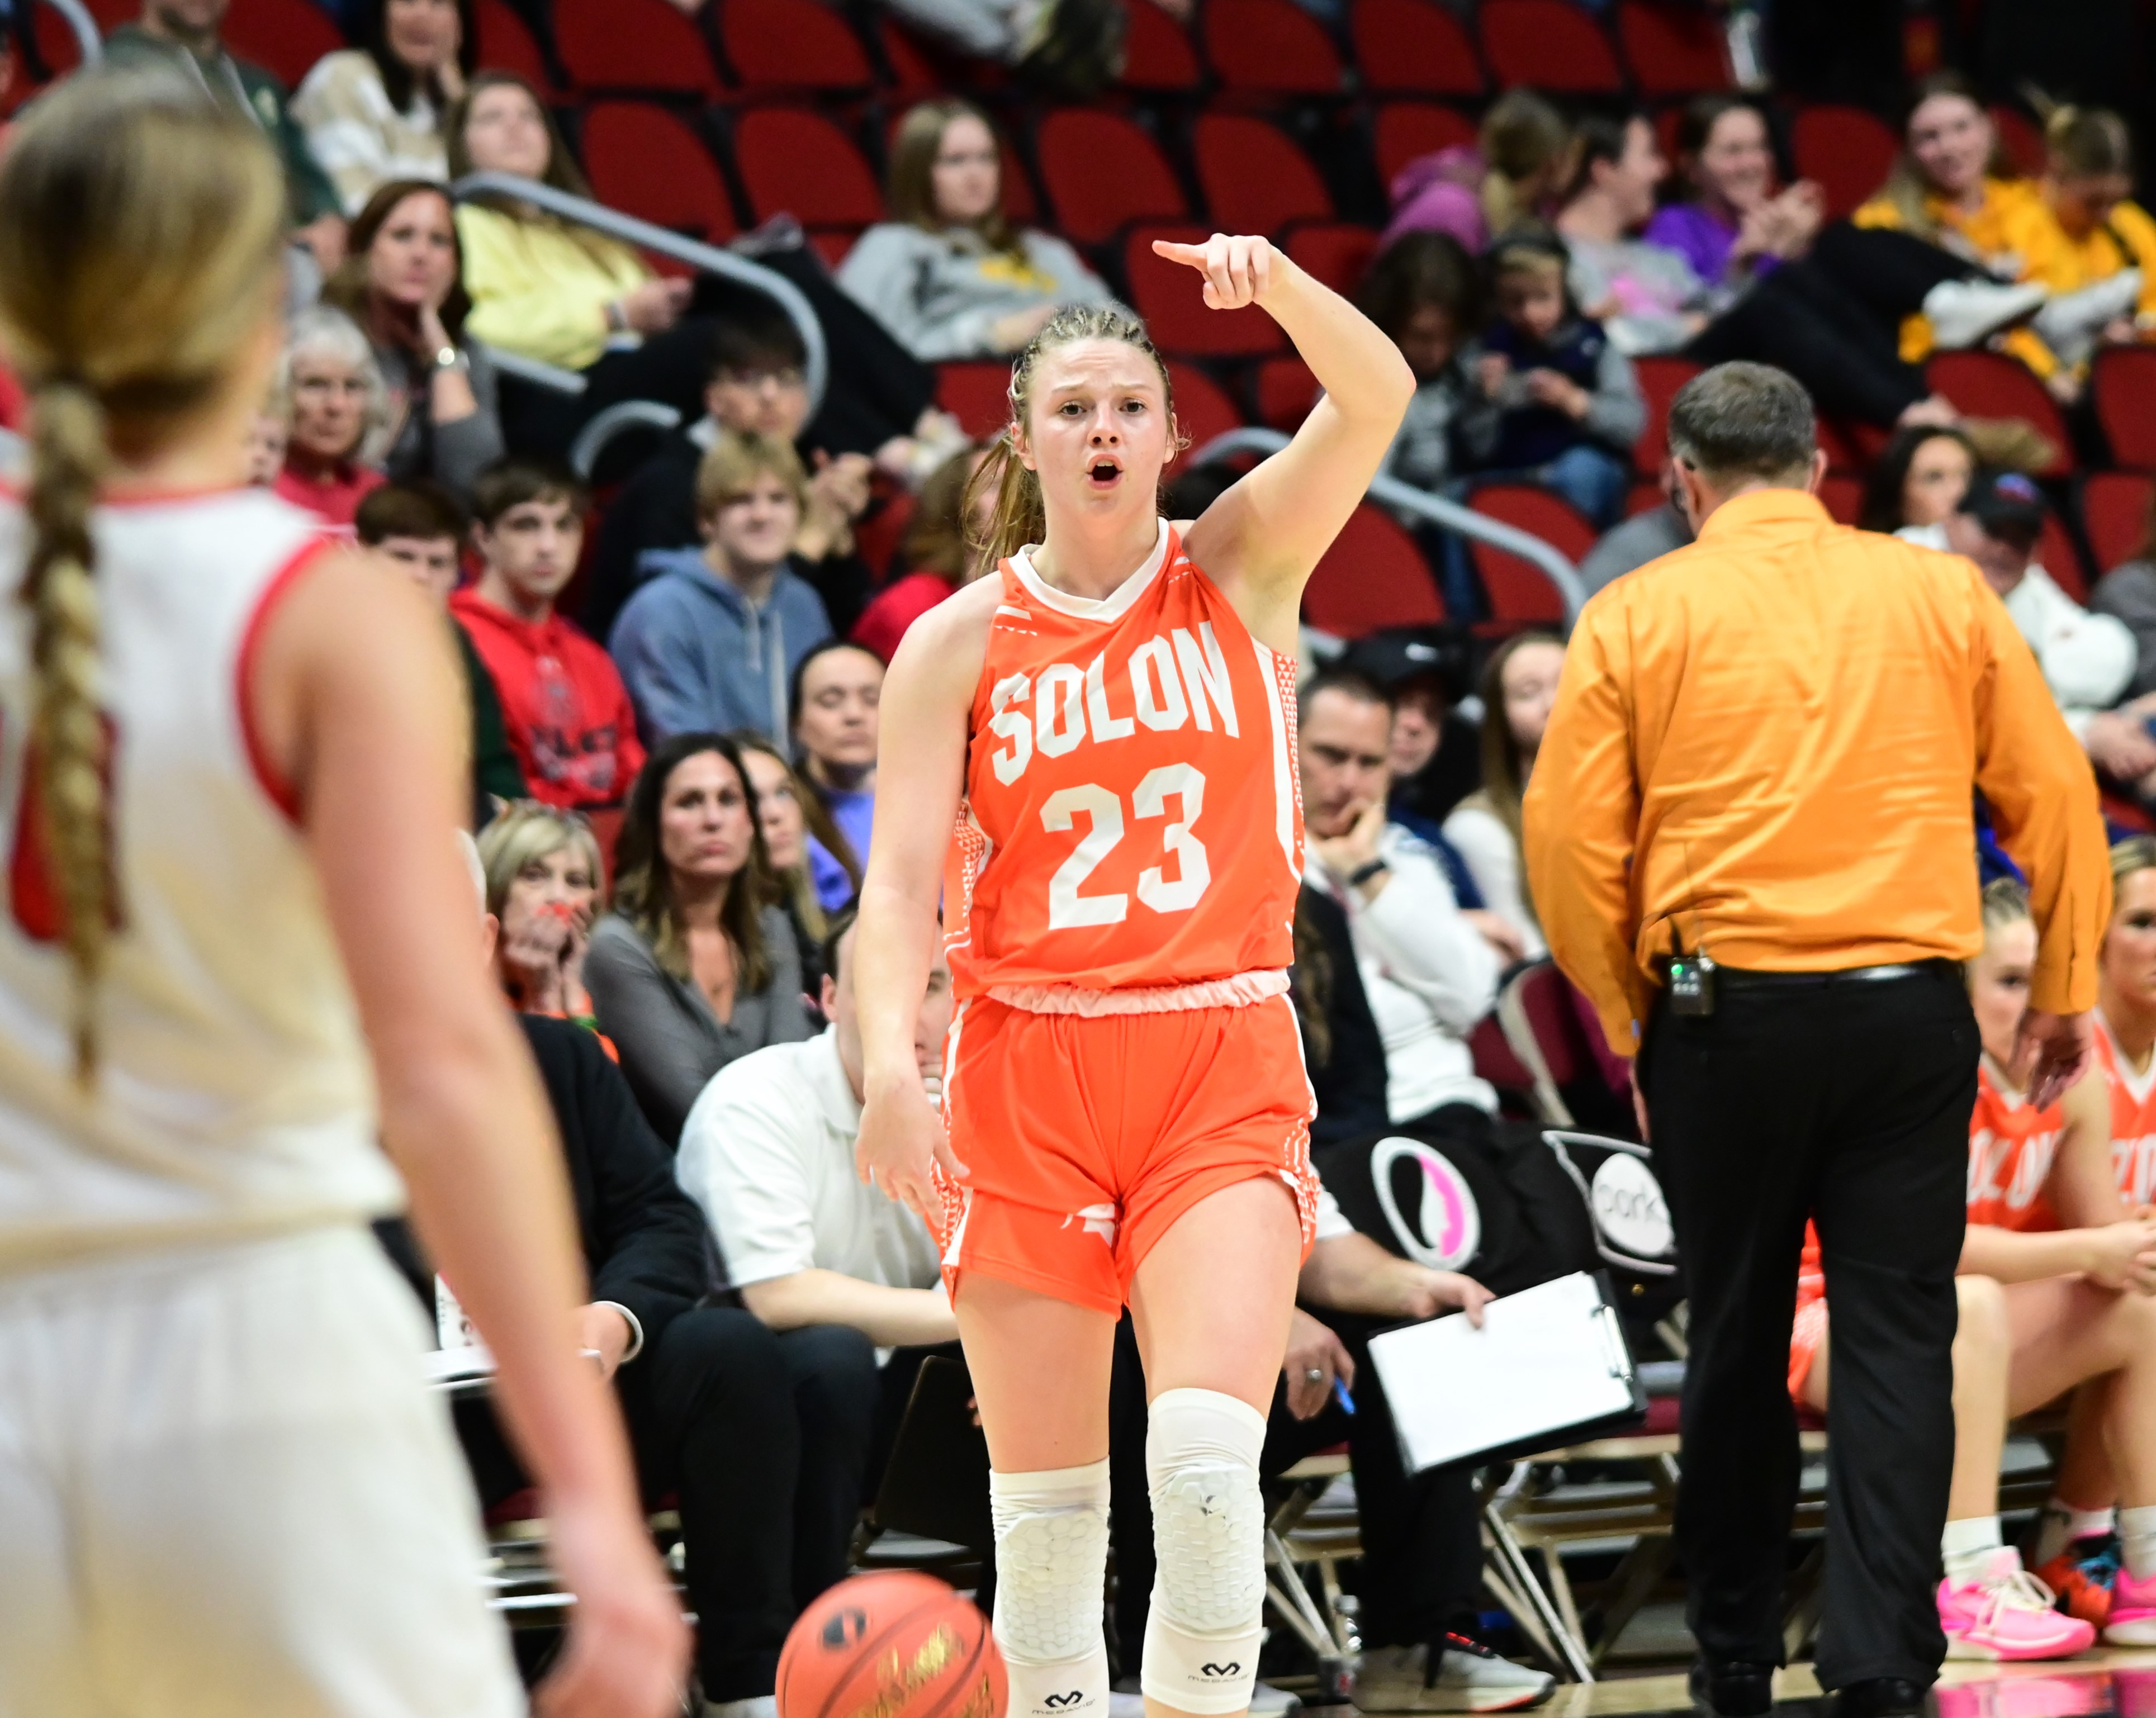 Solon's Callie Levin dribbles up the court and calls an offensive play during the Class 3A state championship against Estherville Lincoln Central on Friday at Wells Fargo Arena in Des Moines. (Photo by Ryan Timmerman)